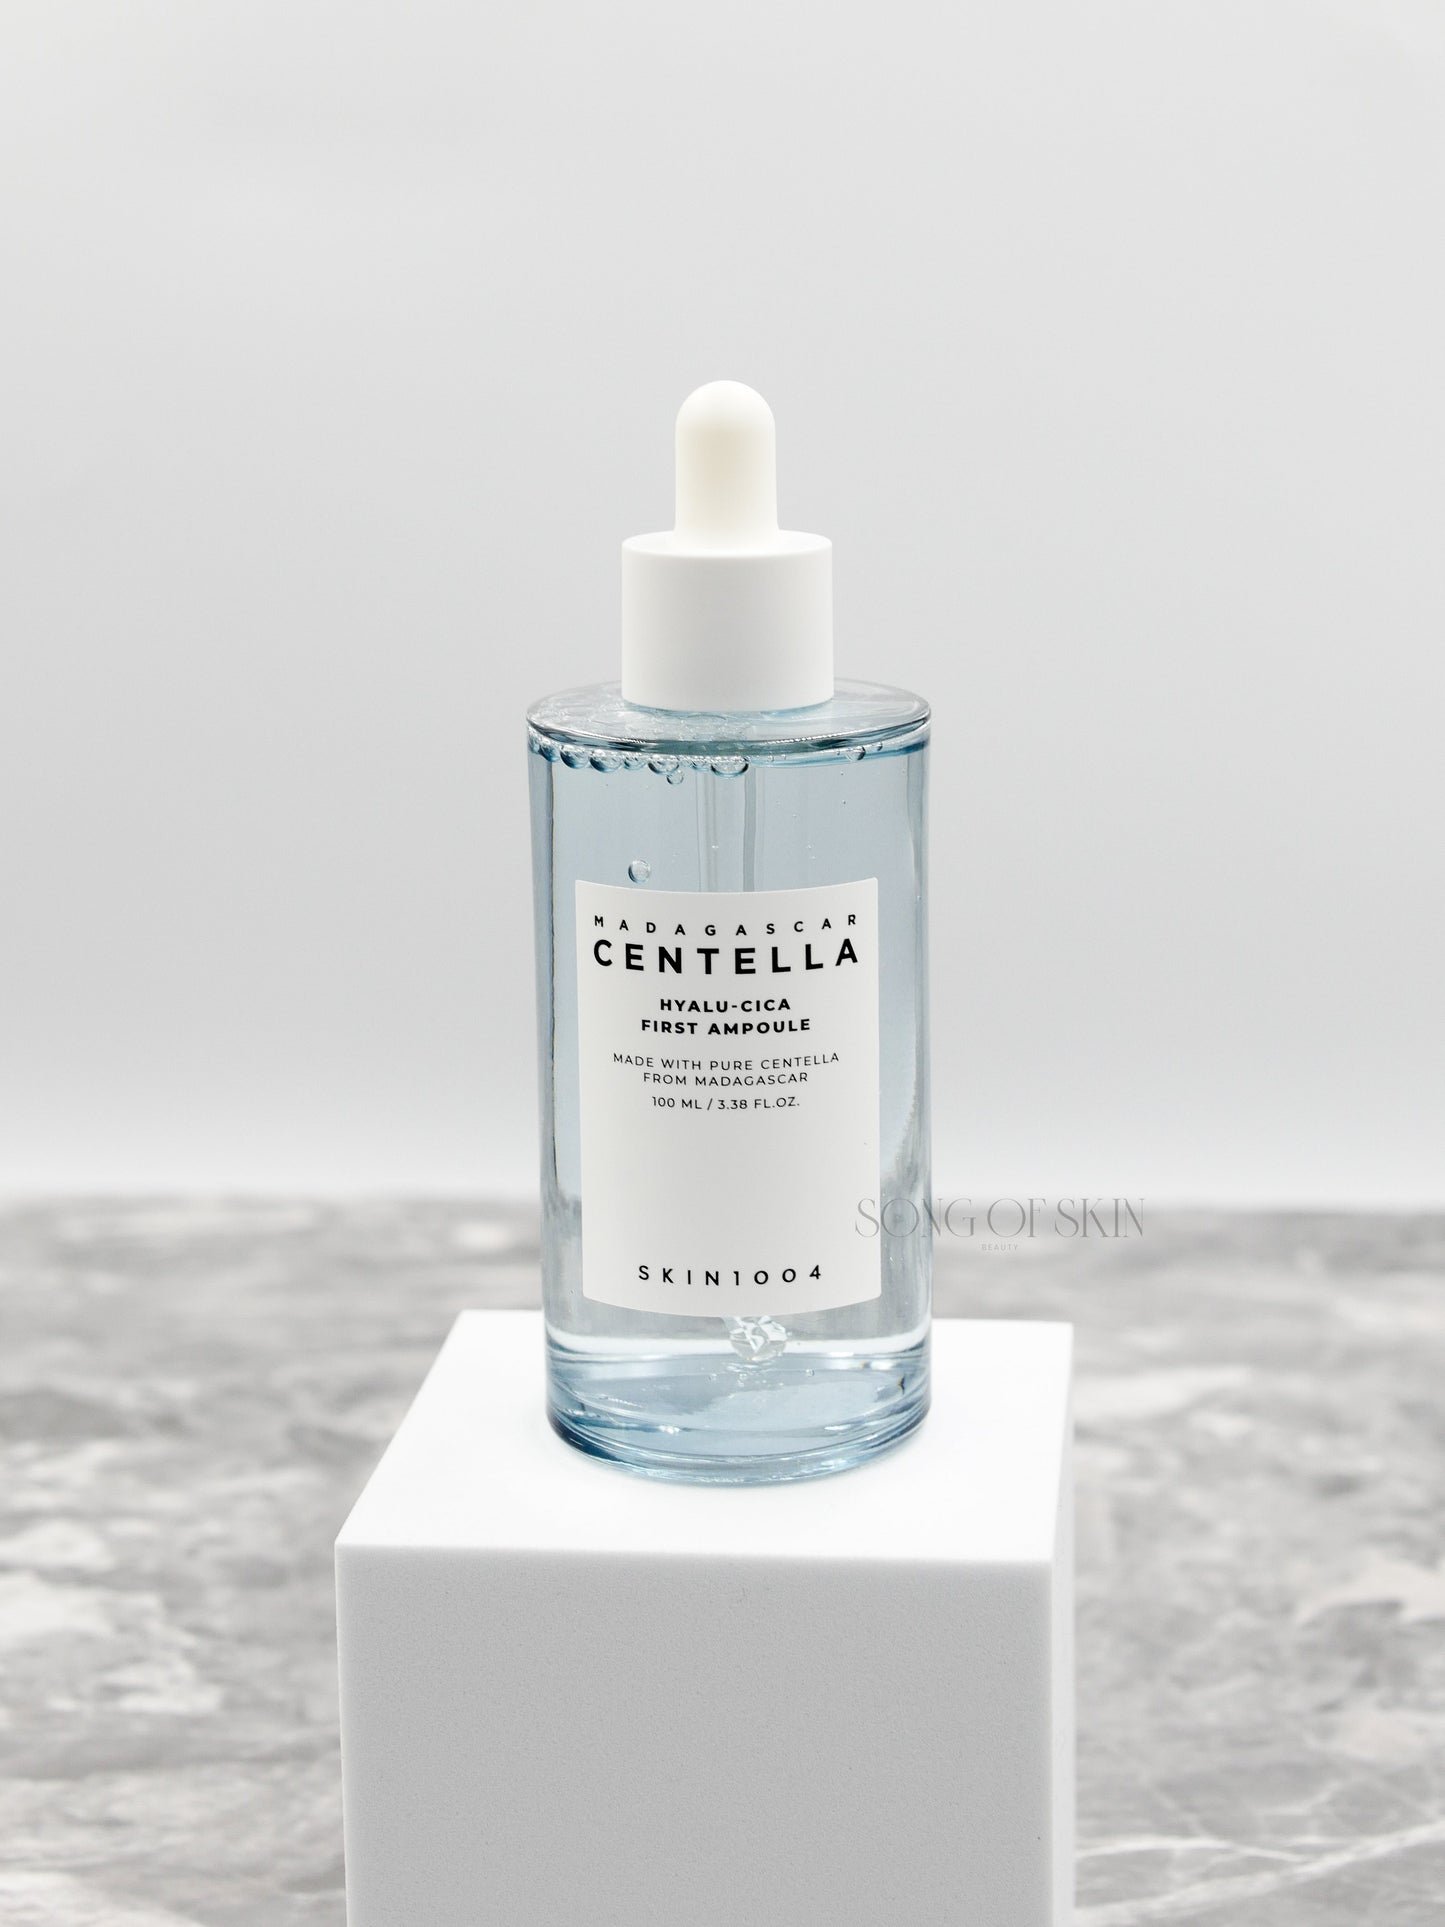 SKIN1004 Madagascar Centella Hyaluronic-Cica First Ampoule